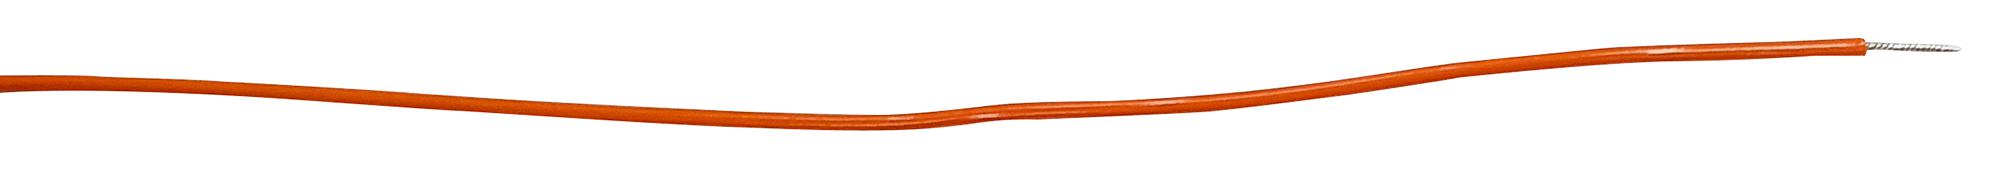 PP002504 CABLE WIRE, 24AWG, ORANGE, 305M PRO POWER